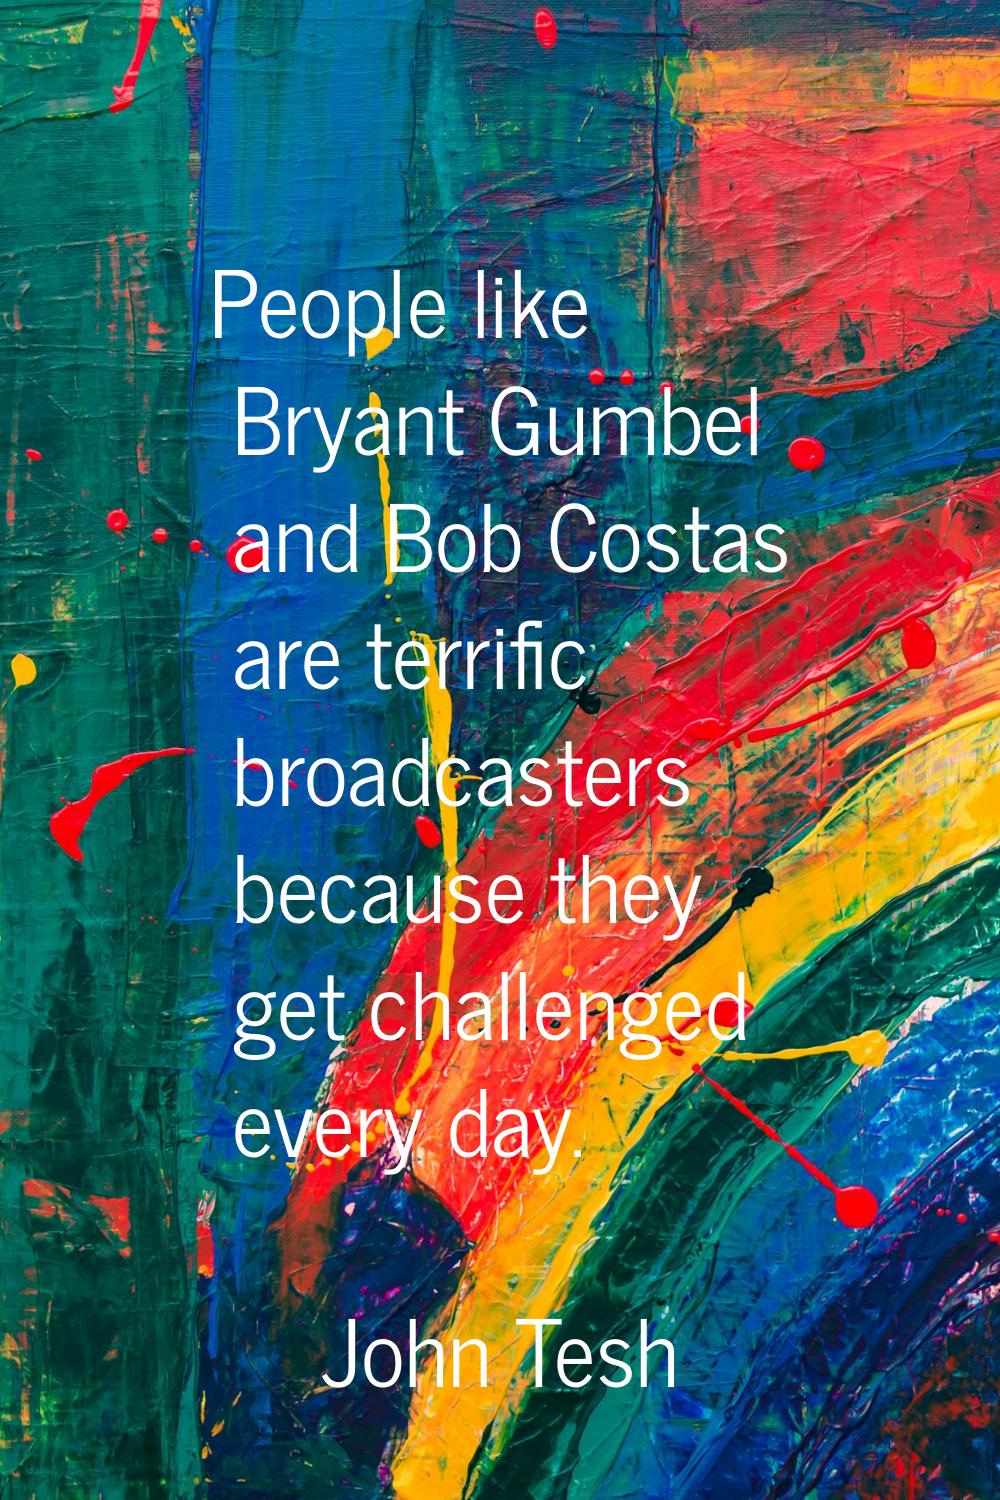 People like Bryant Gumbel and Bob Costas are terrific broadcasters because they get challenged ever